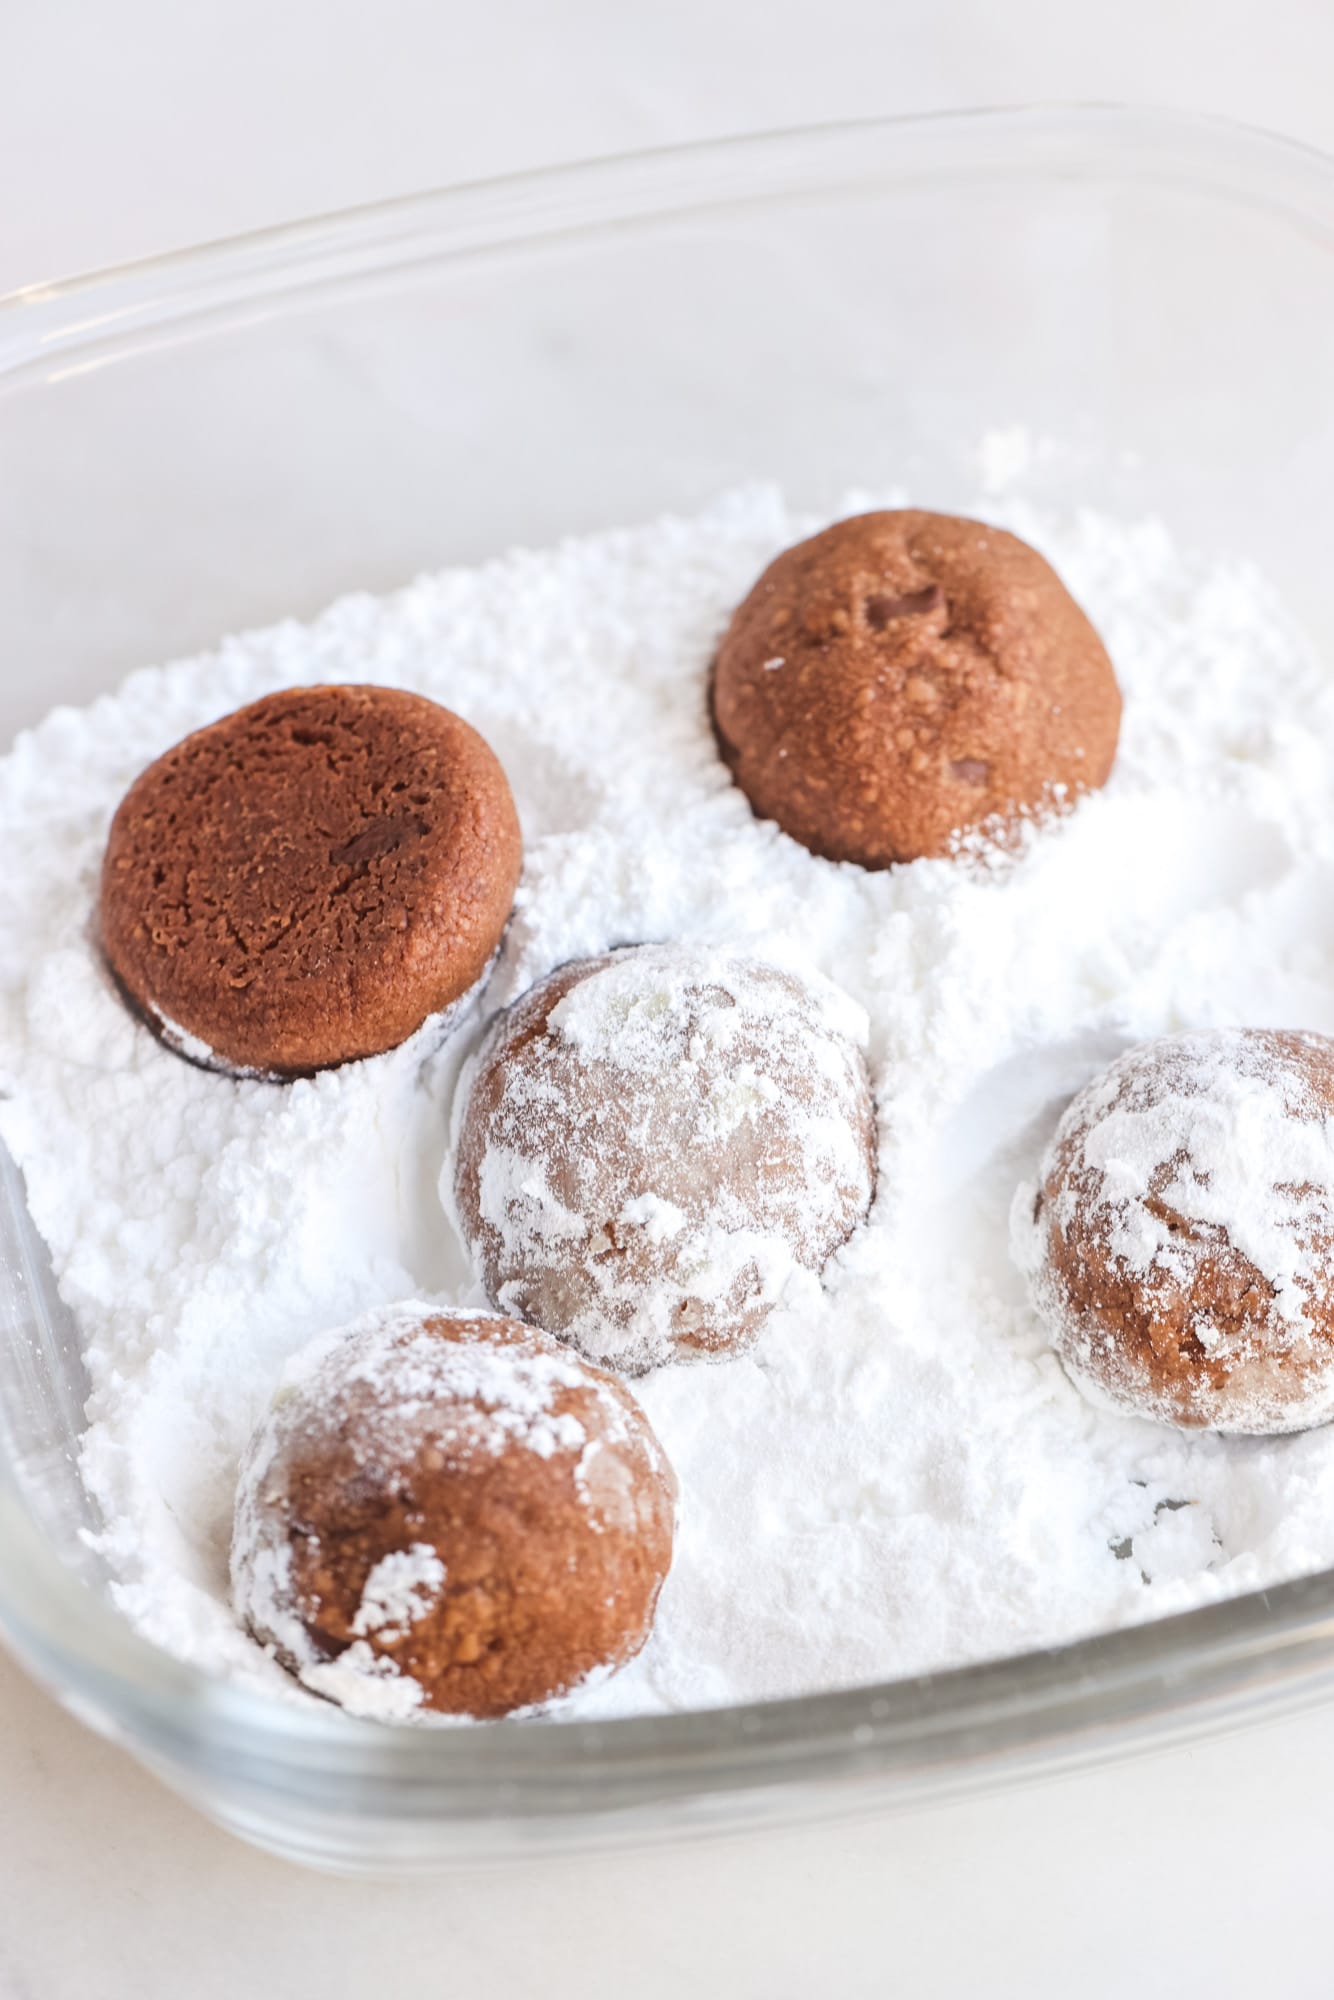 Chocolate, snowball cookies, being rolled in powdered sugar in a glass bowl